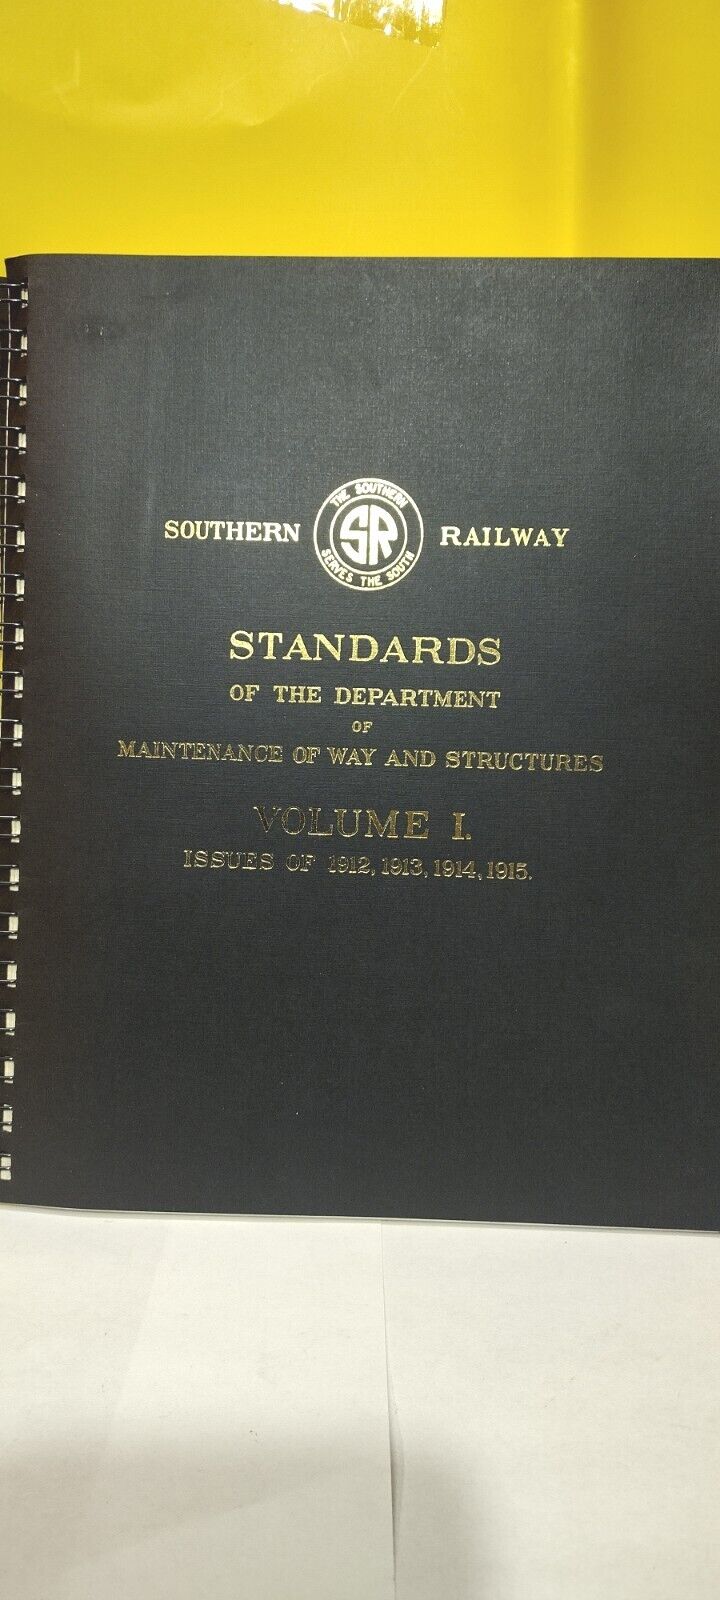 Southern Railway Standards of the Department of Maintenance of Way & Structures